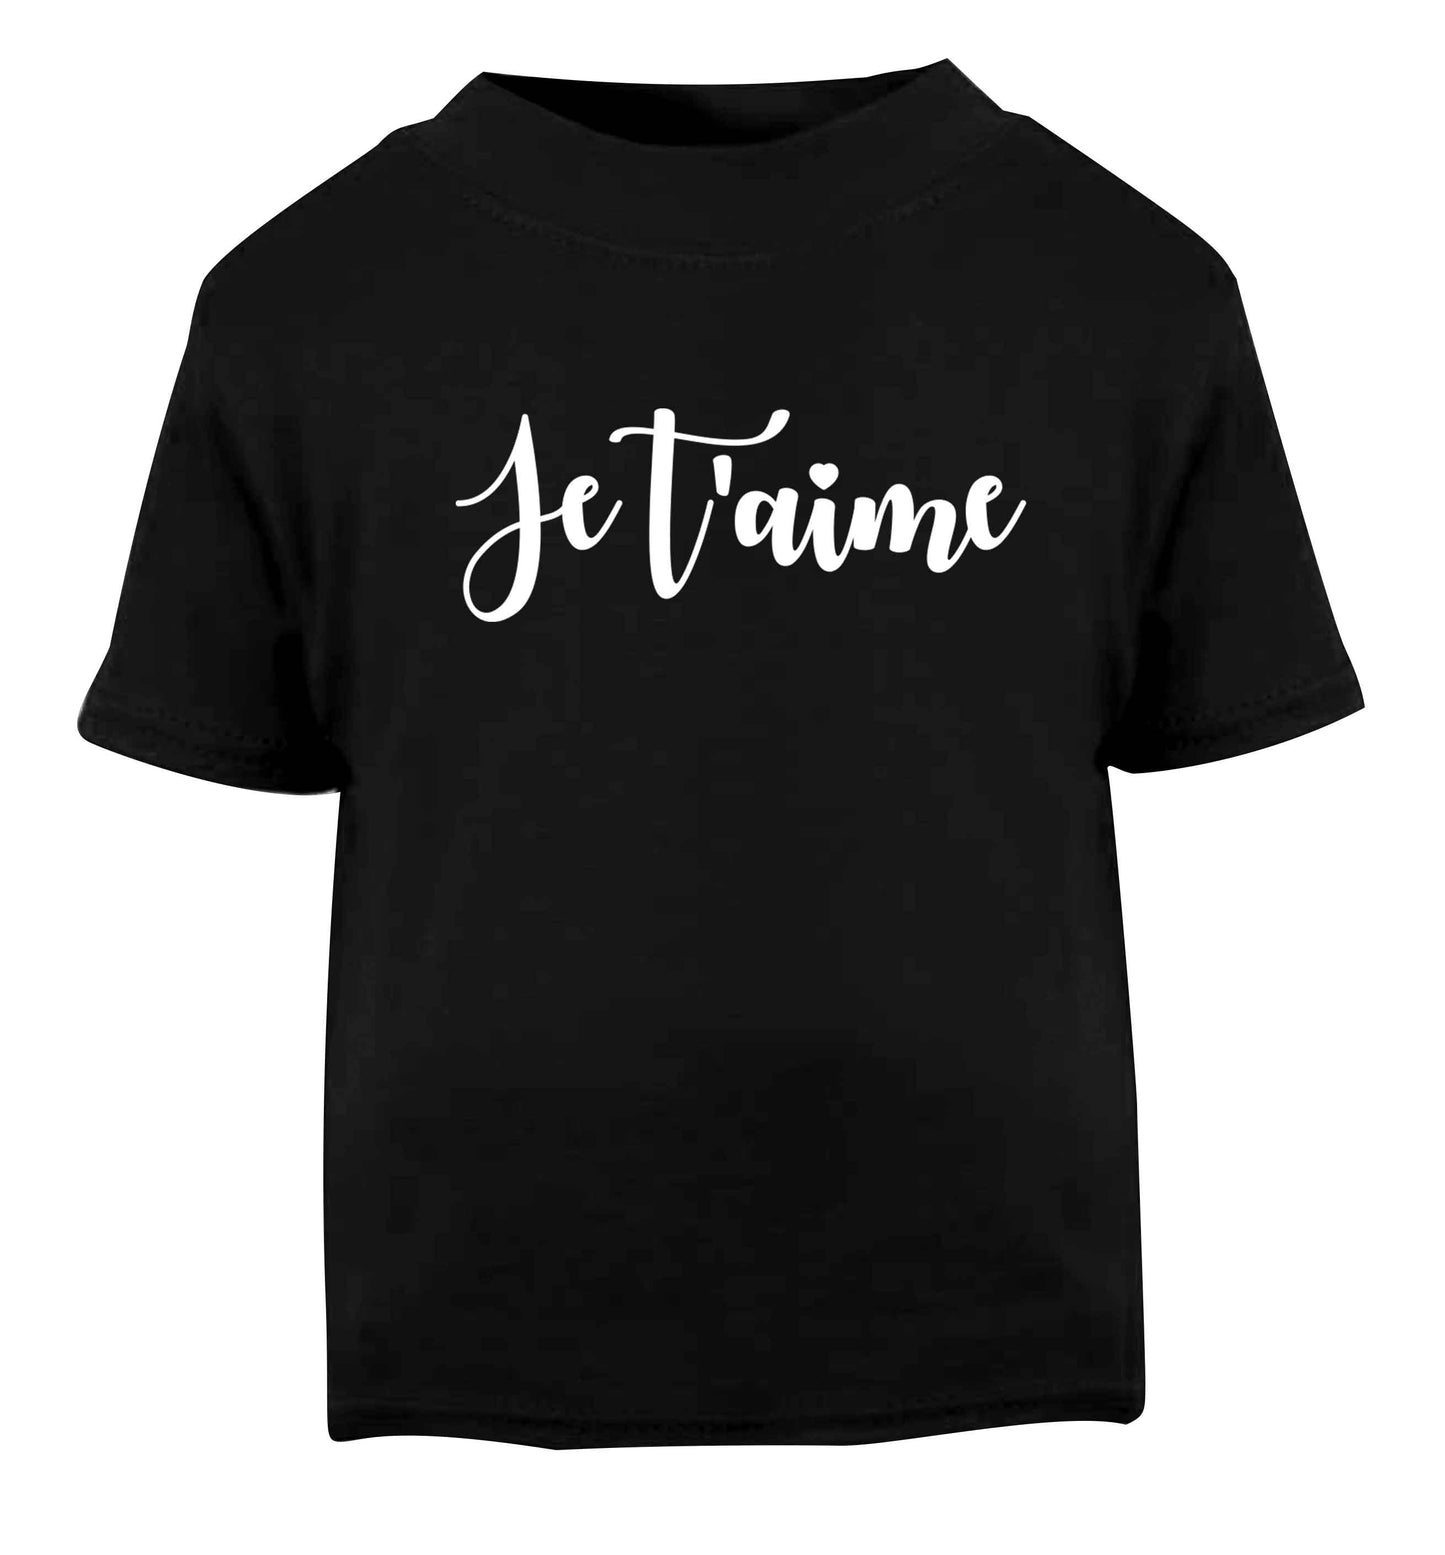 Je t'aime Black baby toddler Tshirt 2 years